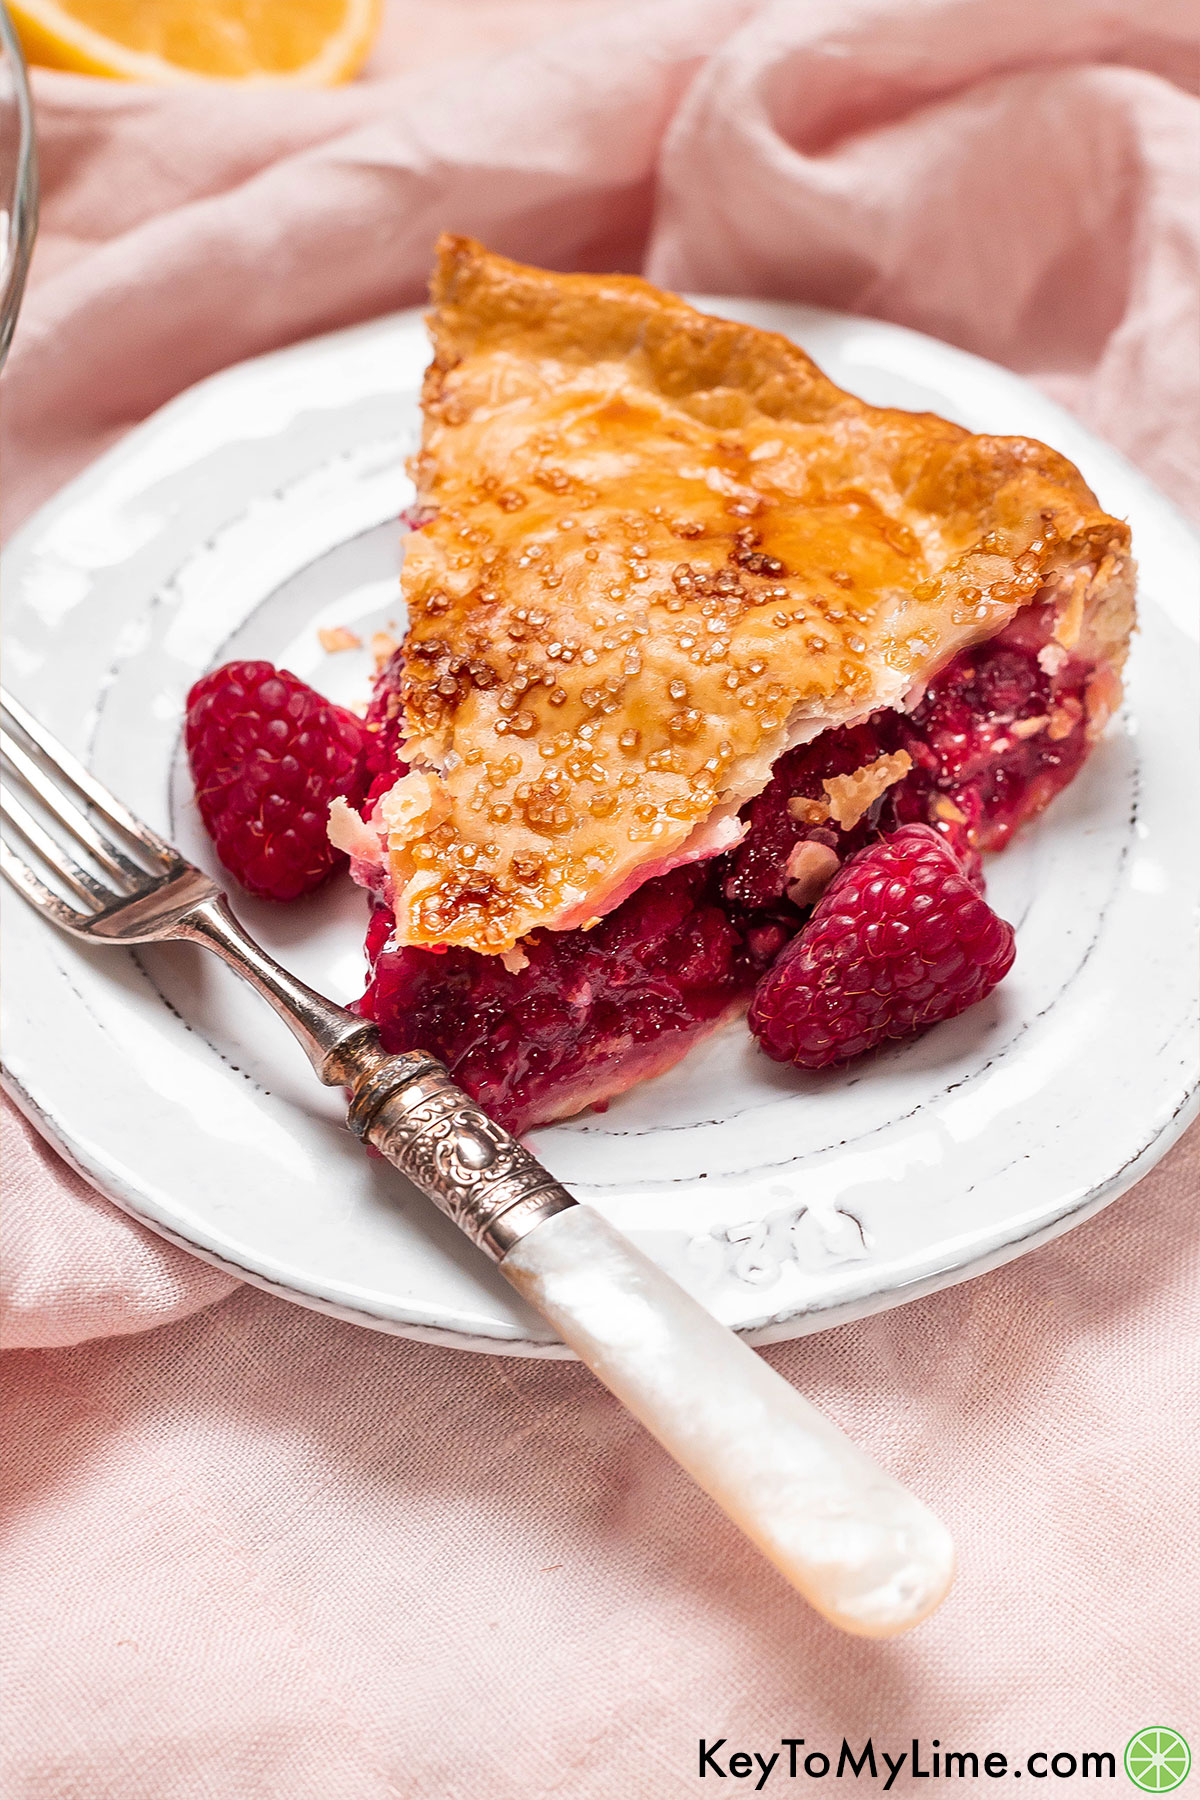 A slice of pie with a golden brown crust filled with a thick raspberry filling served on a white plate with fresh berries to the side.